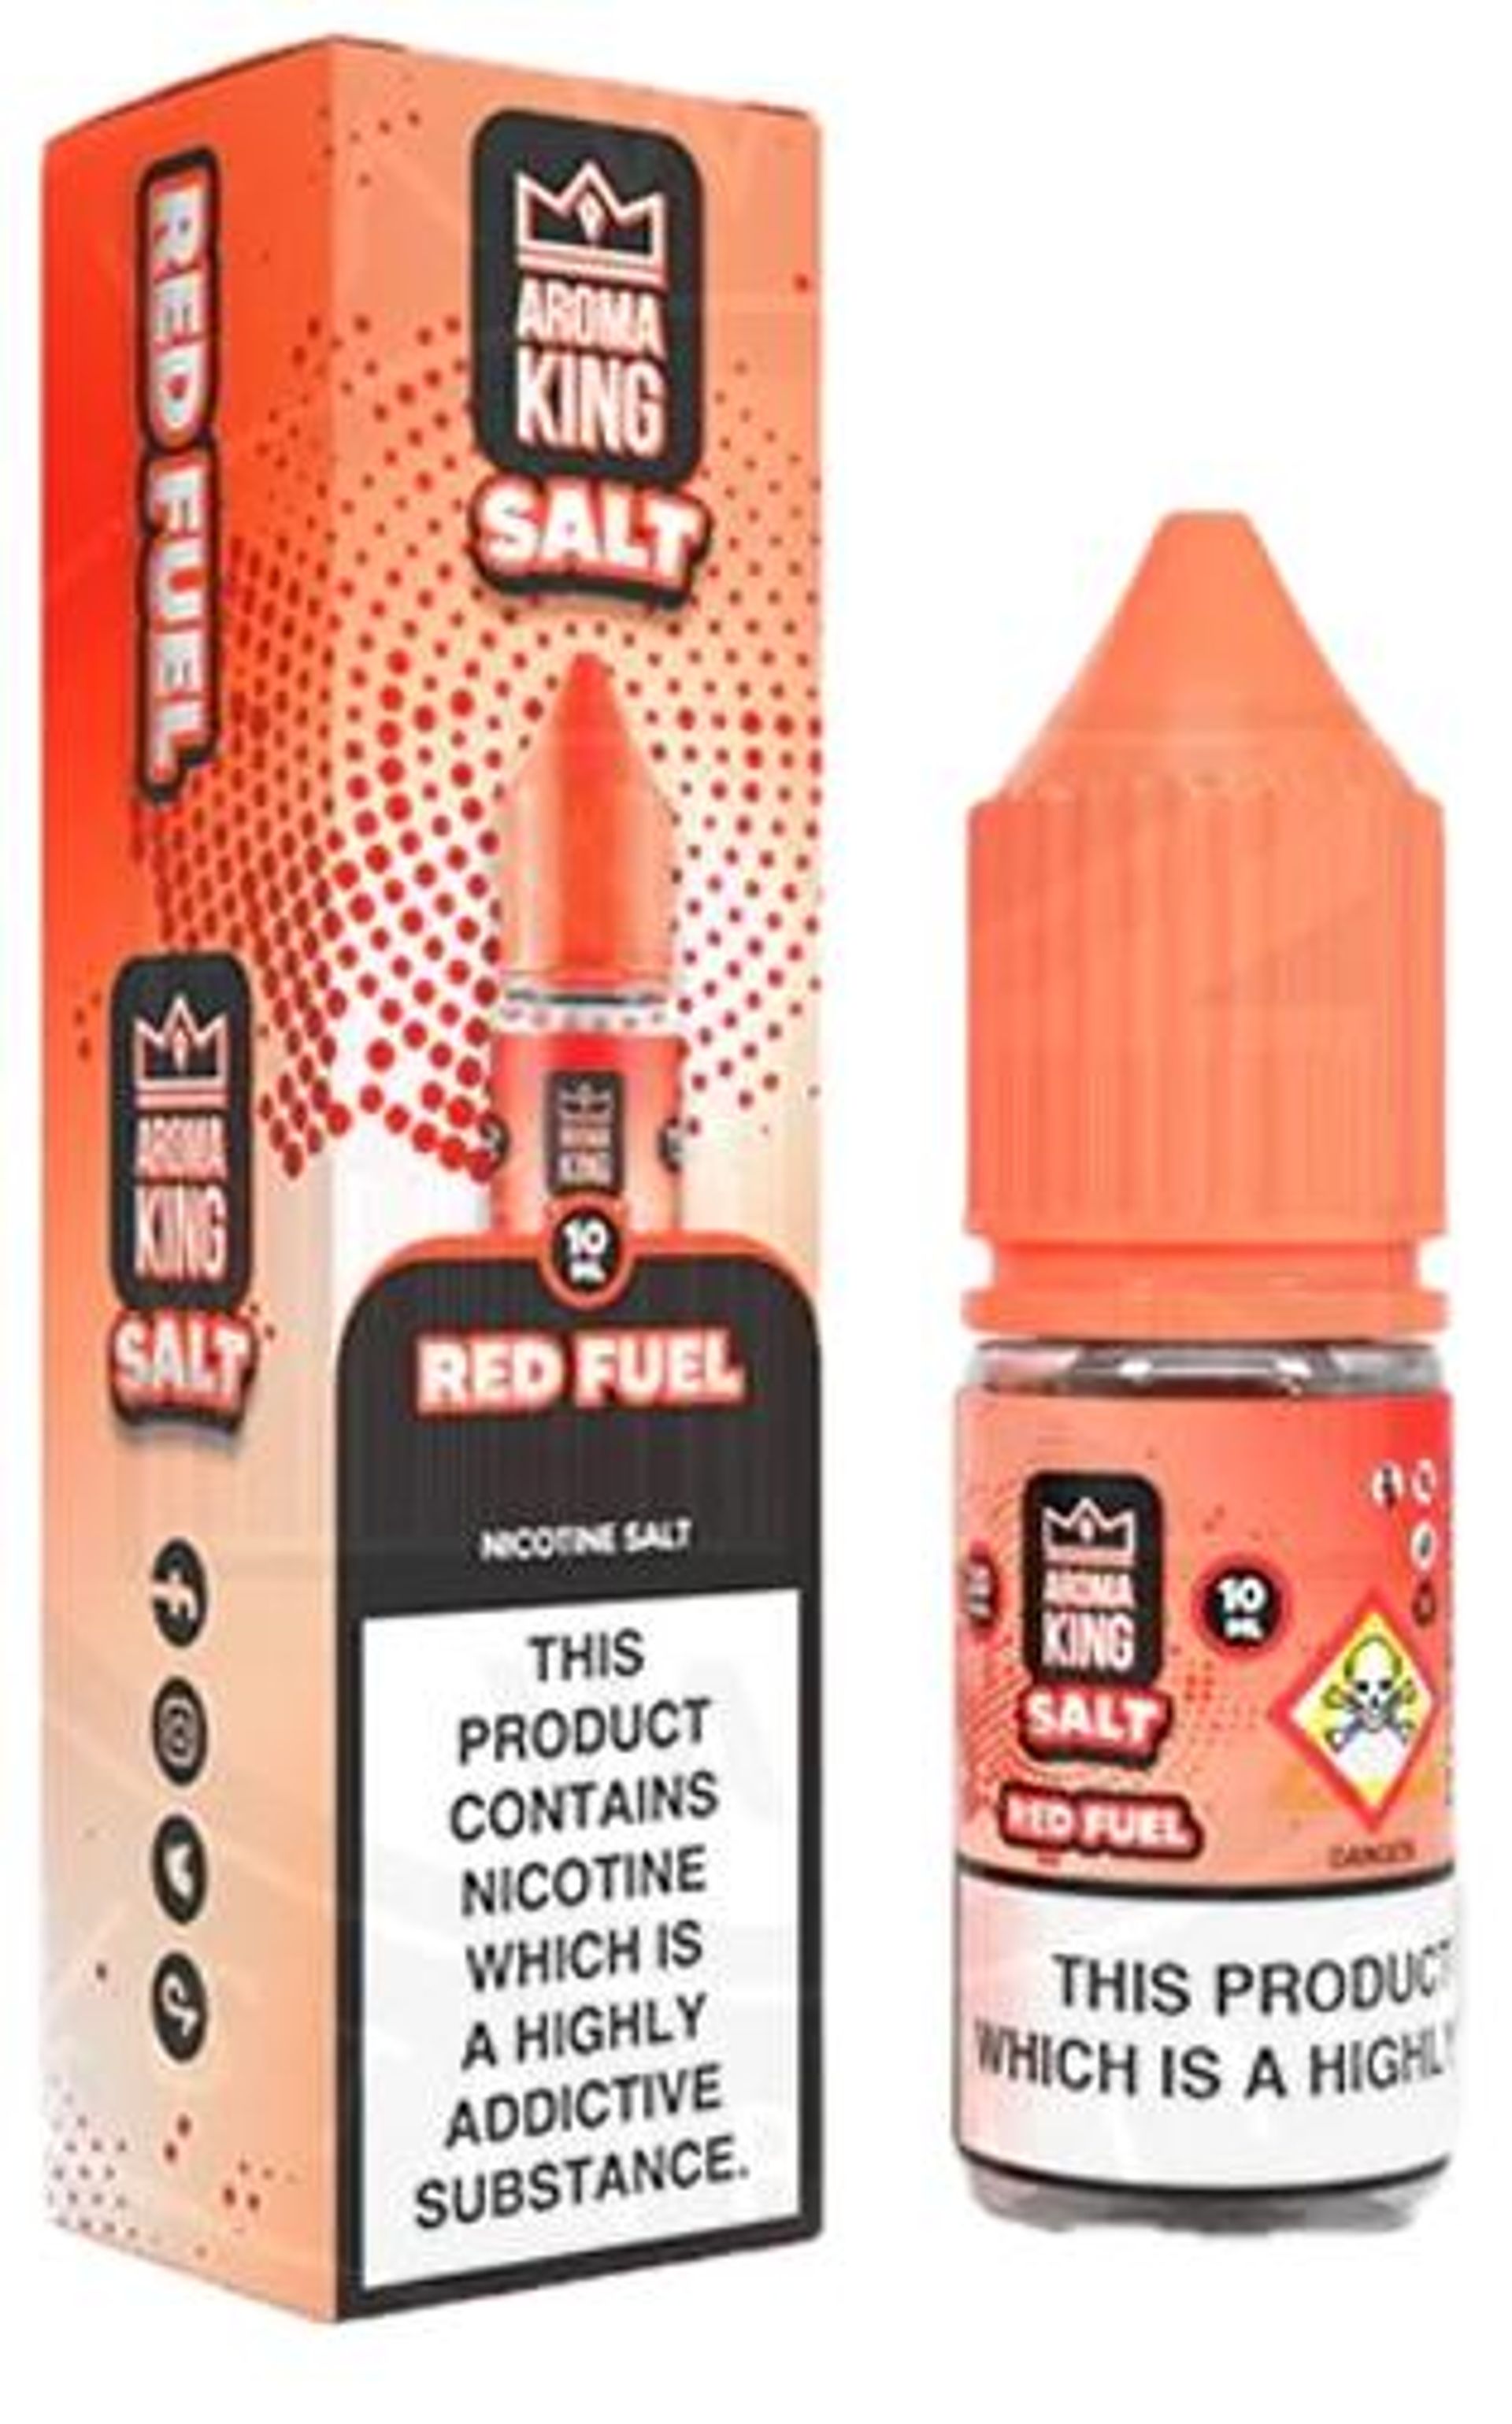 Image of Red Fuel by Aroma King